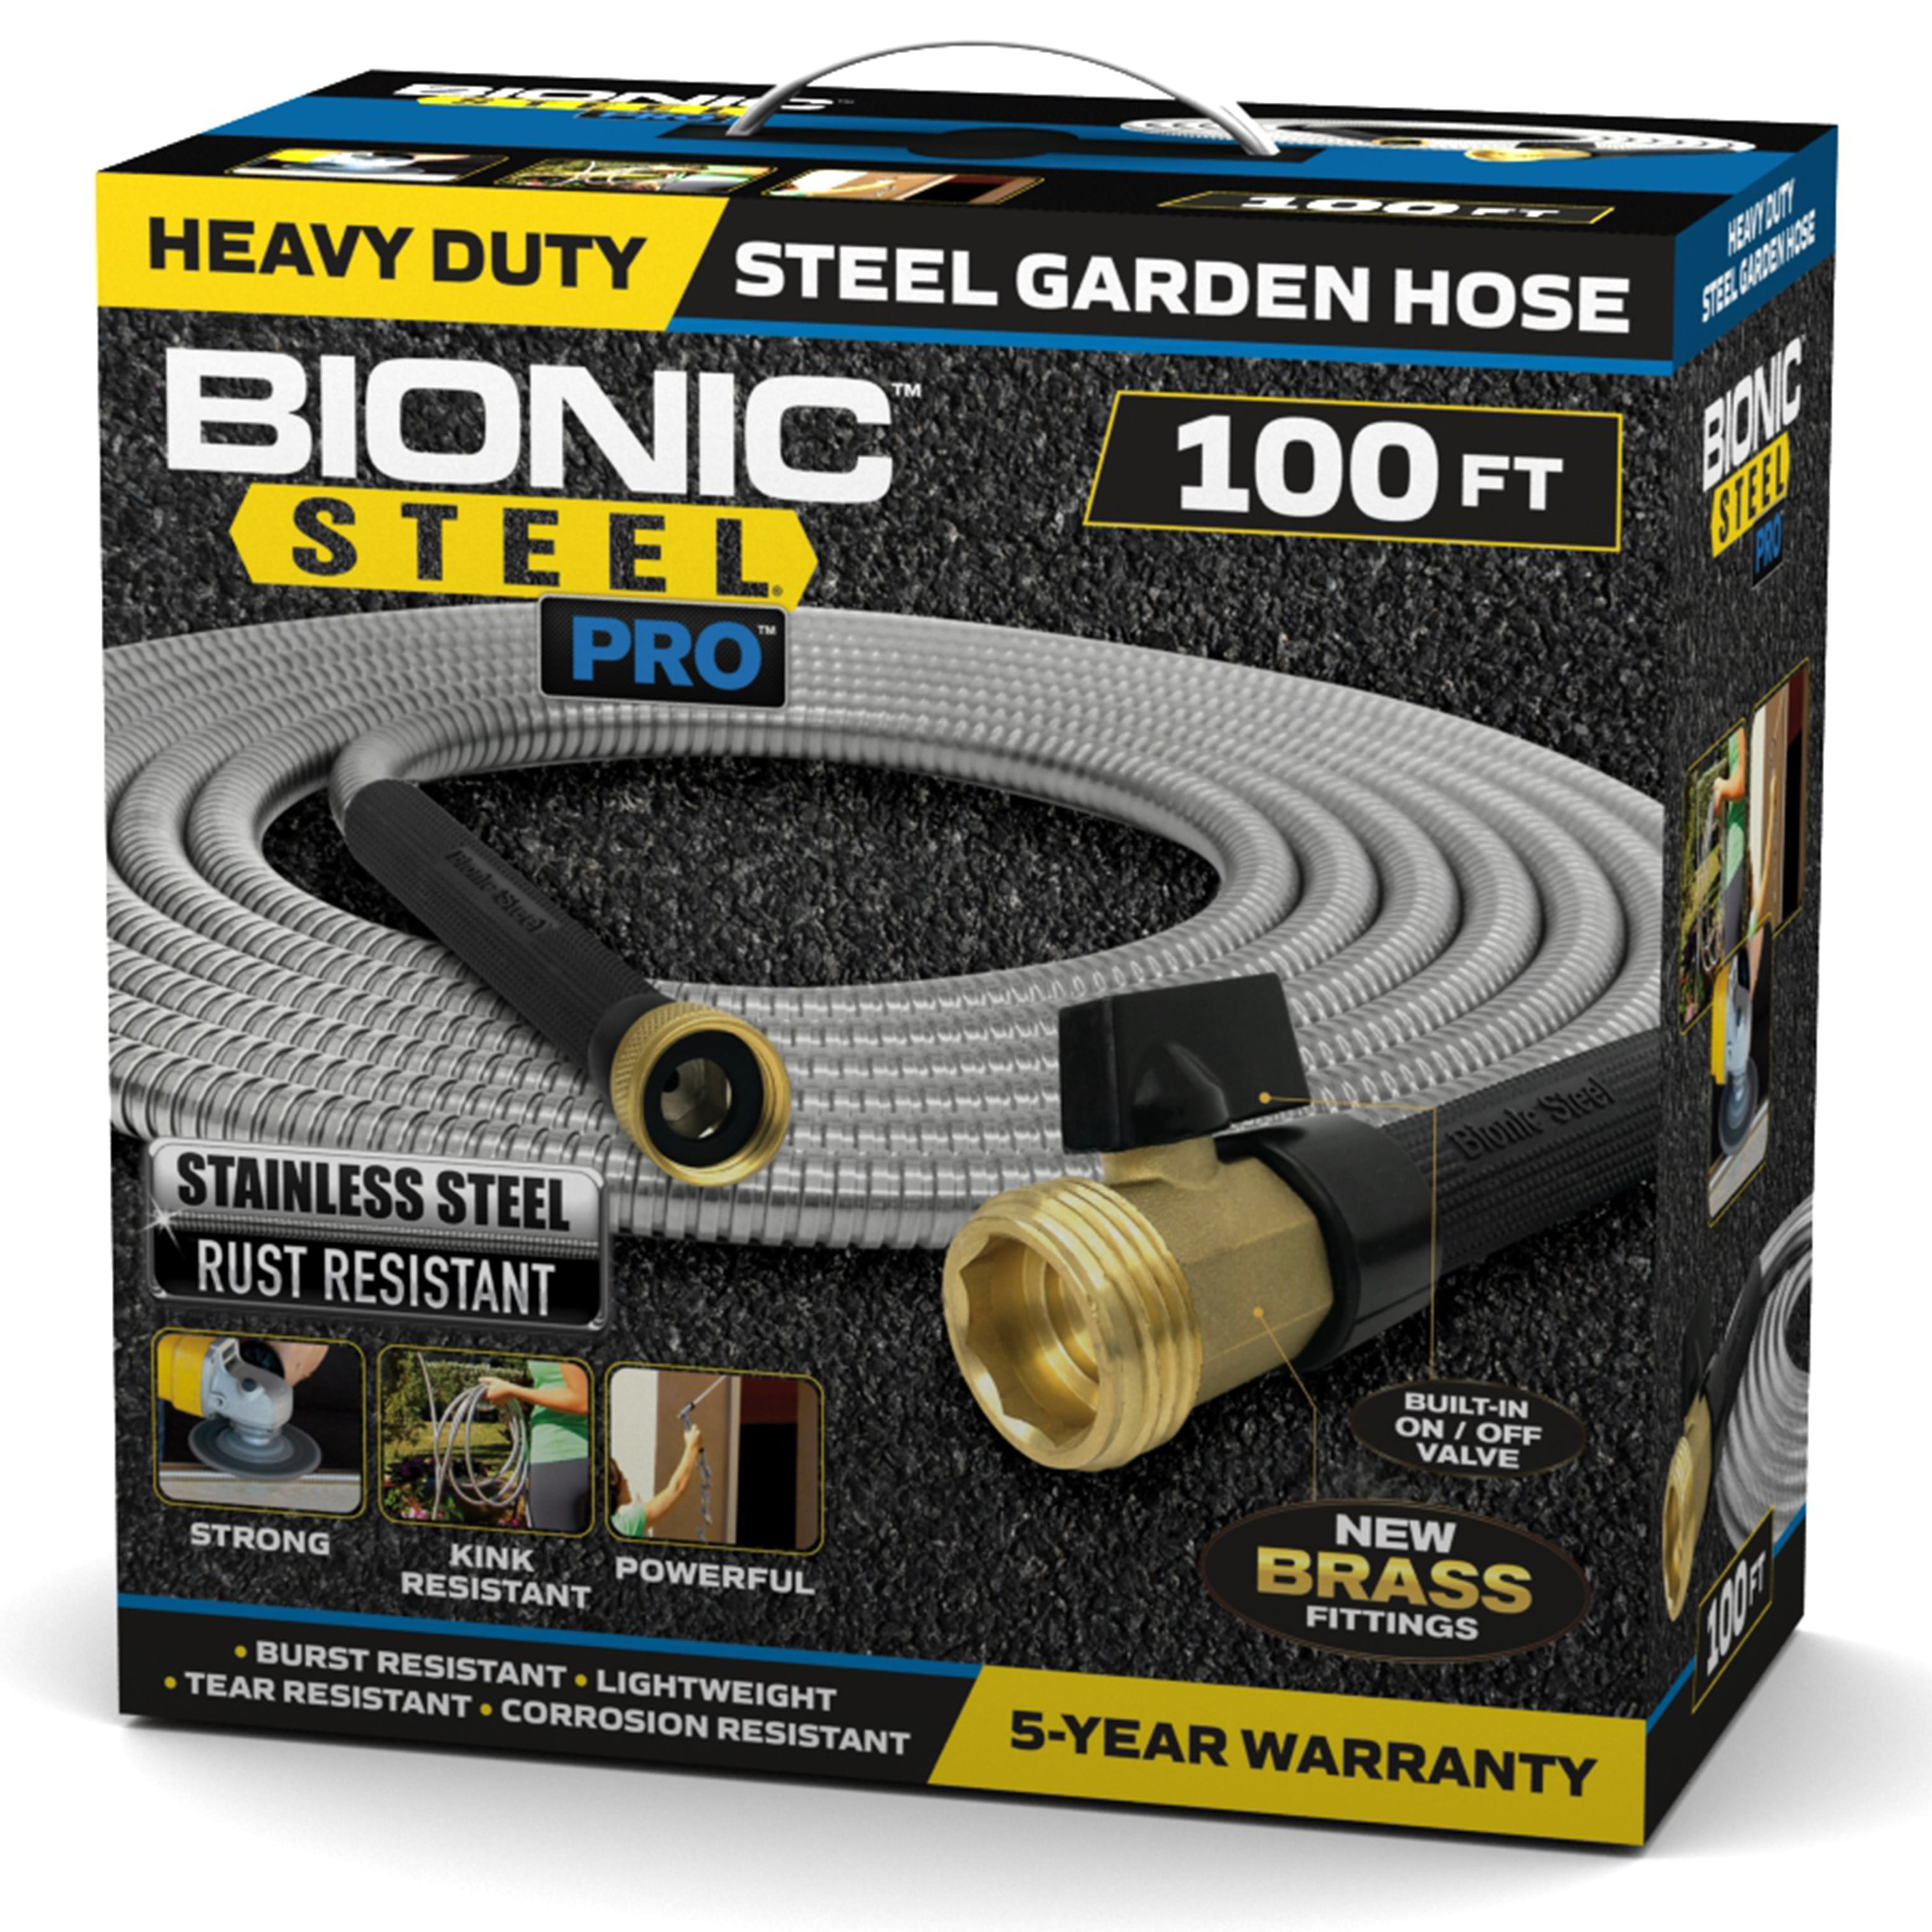 Heavy Duty 304 Stainless Steel Garden Hose 50 Ft Outdoor Water Hose With Nozzle 